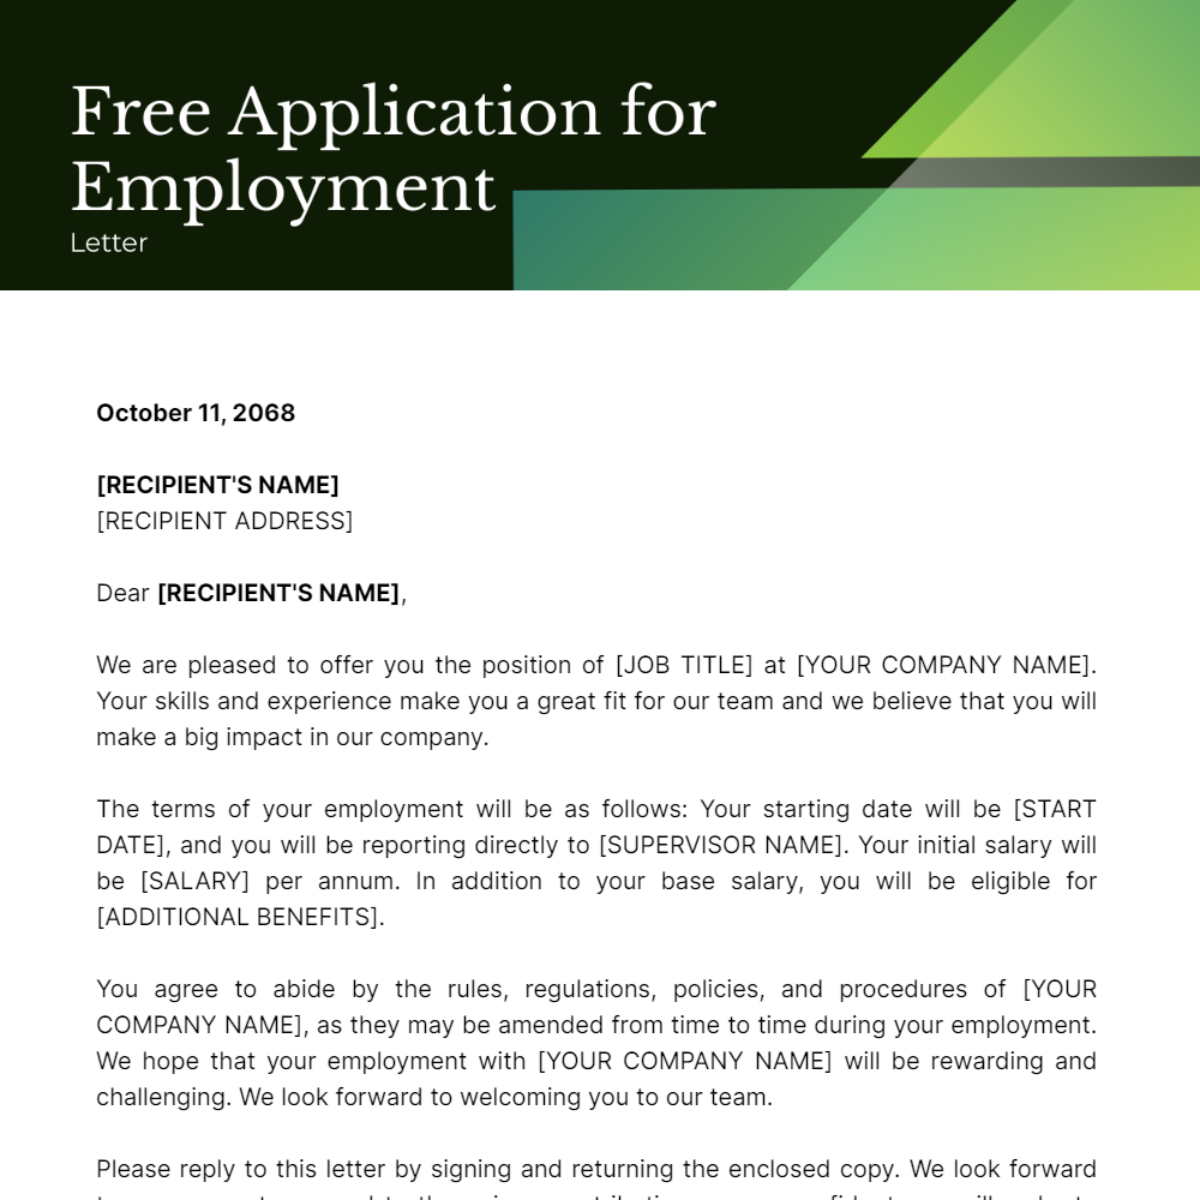 Application for Employment Letter Template